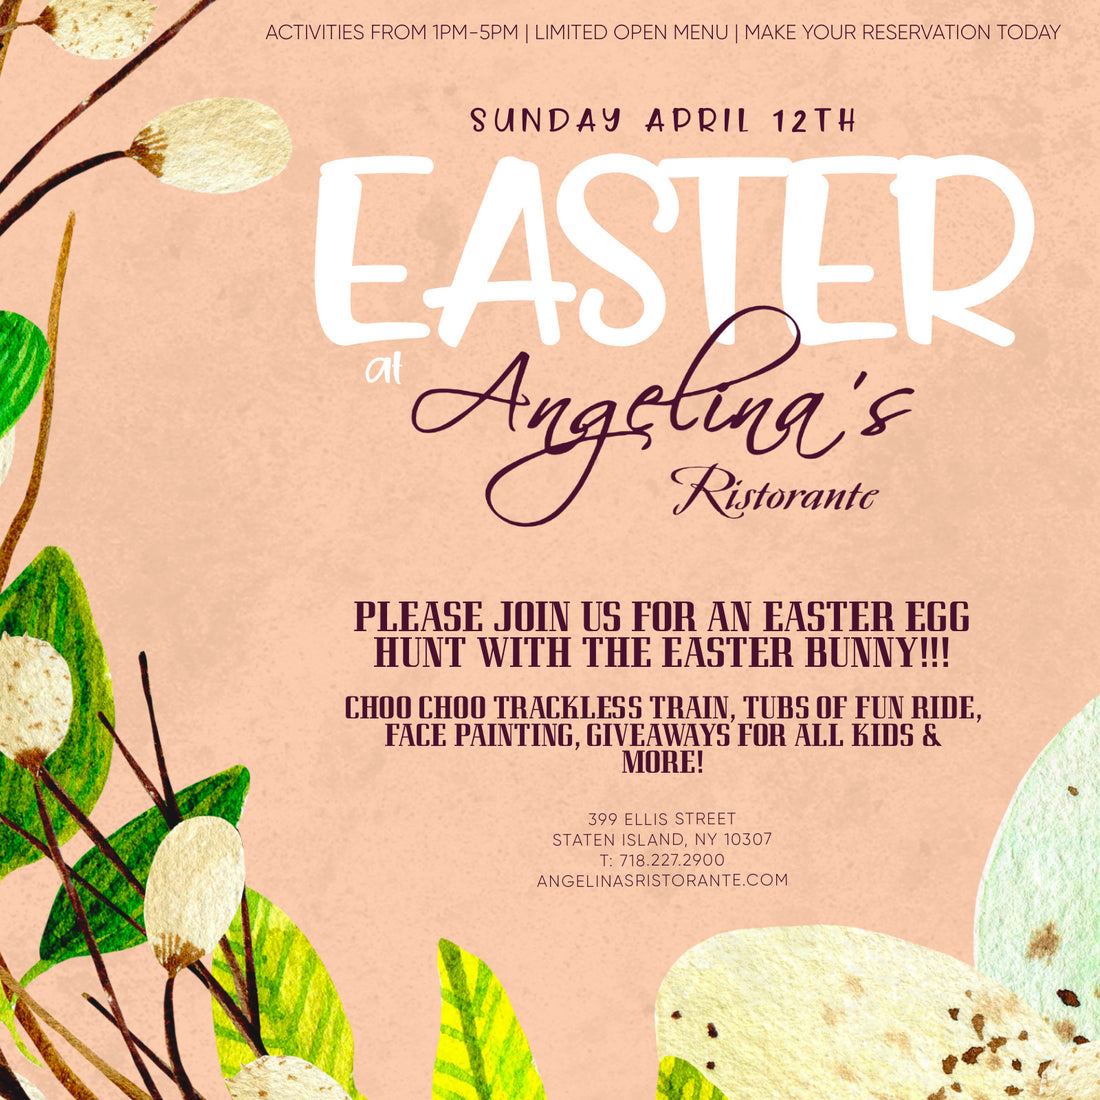 Easter at Angelinas